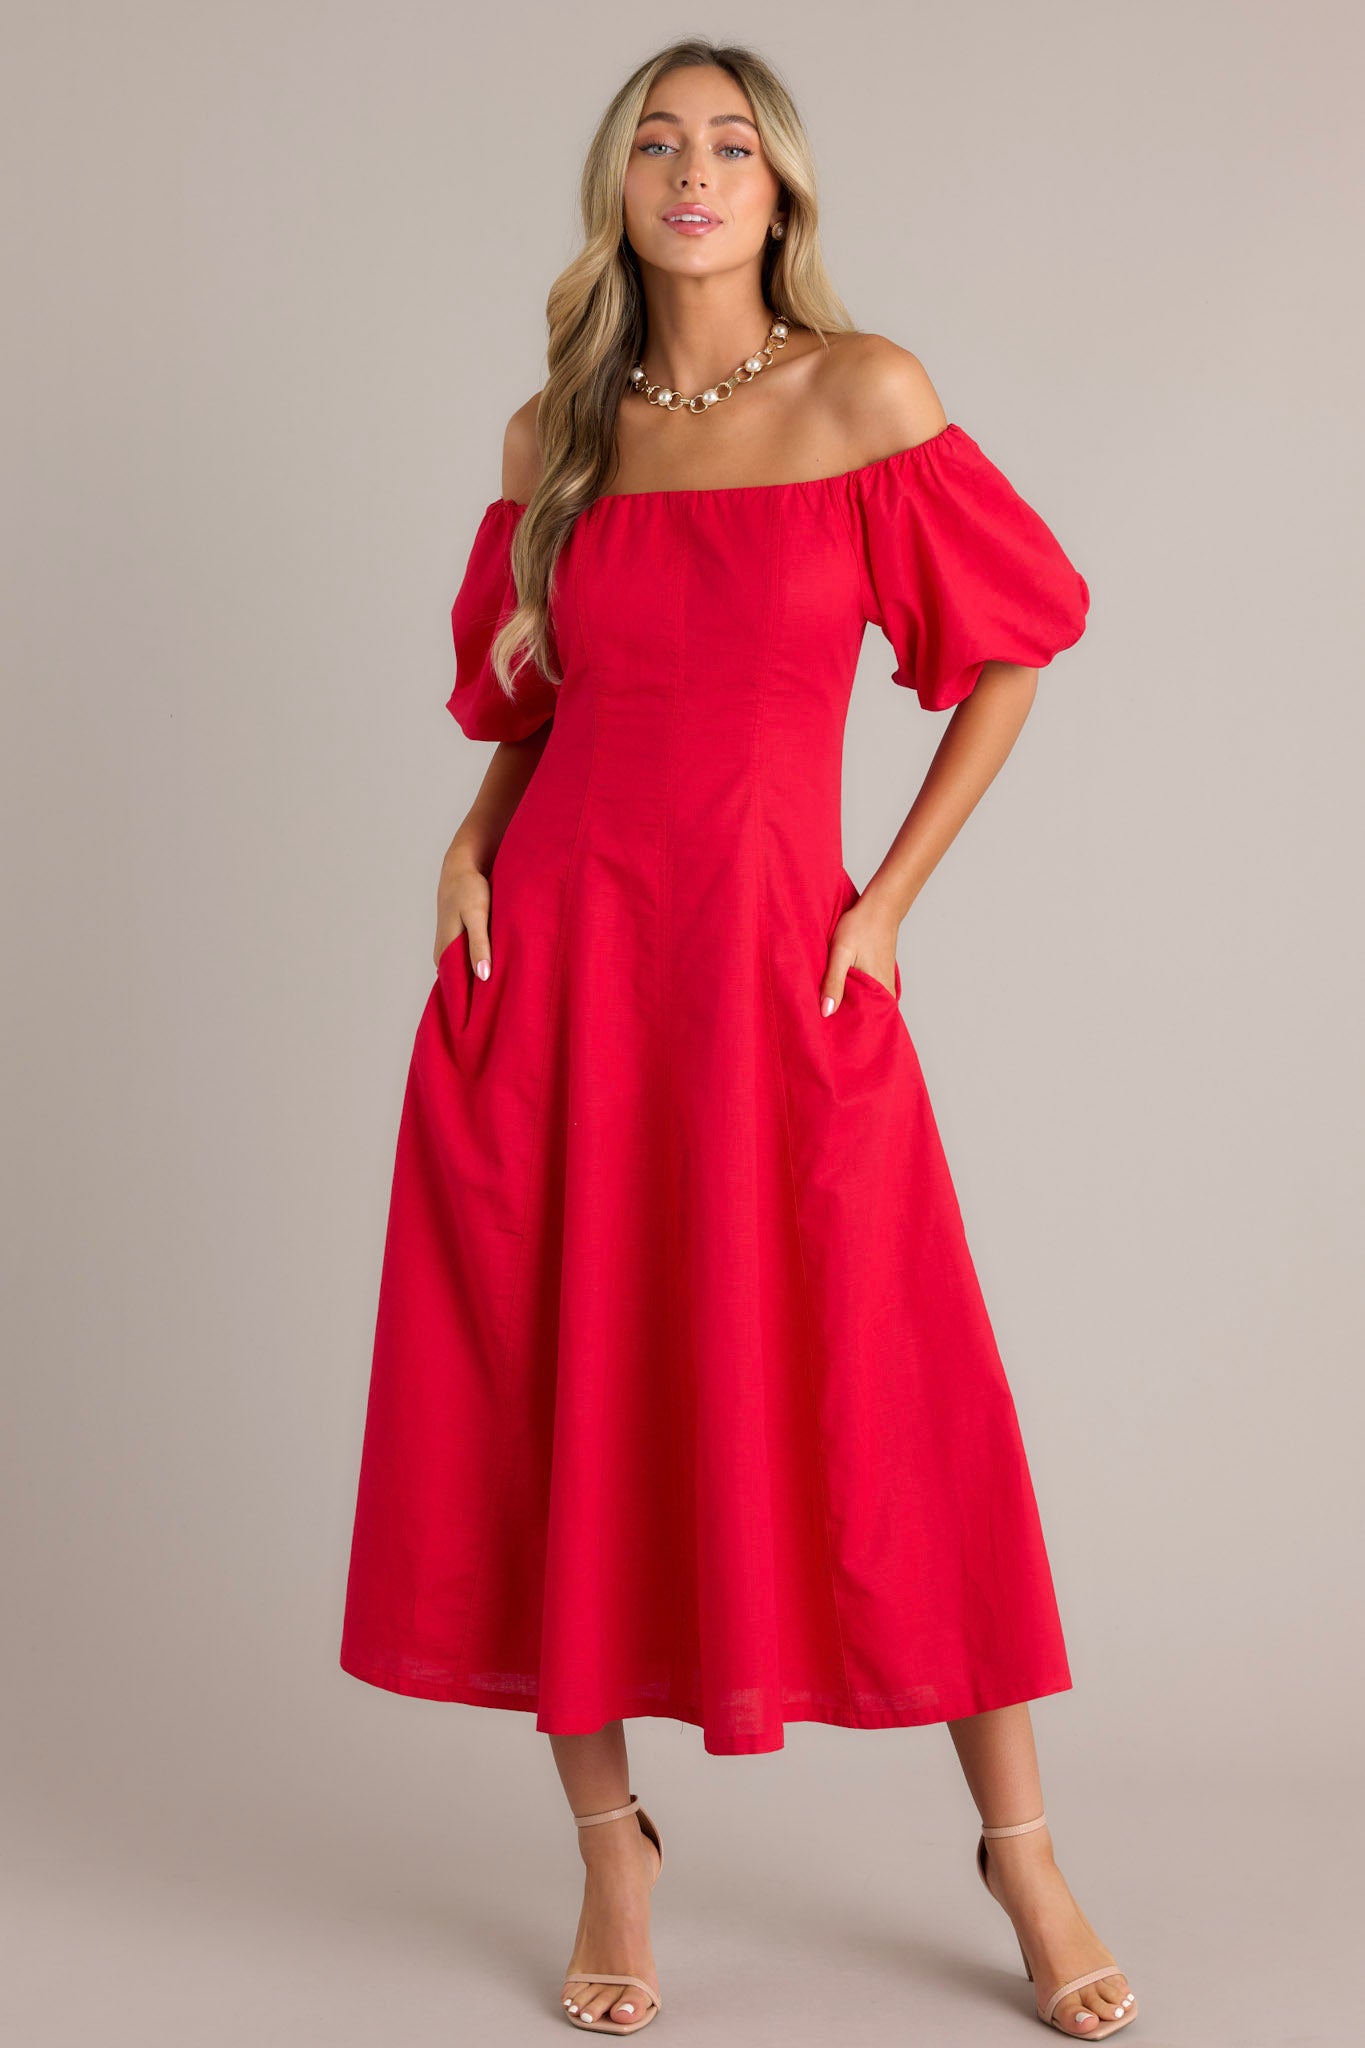 Full body view of this off-the-shoulder red dress featuring puffed sleeves and a fitted bodice that flares out into a flowy, ankle-length skirt.